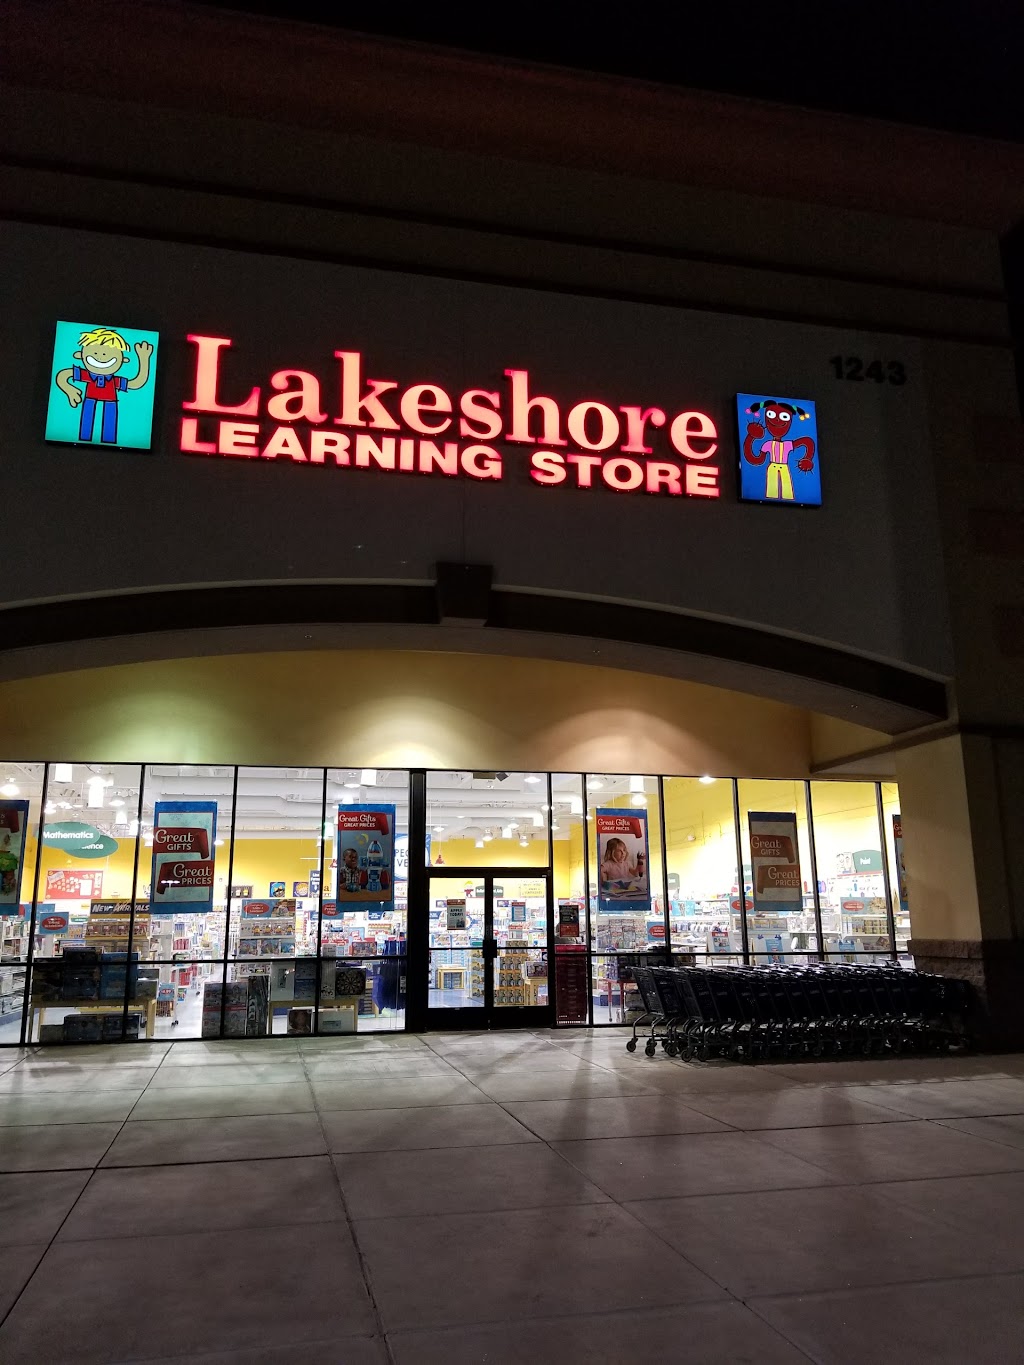 Lakeshore Learning Store | 1243 W Warm Springs Rd, Henderson, NV 89014, USA | Phone: (702) 396-2890